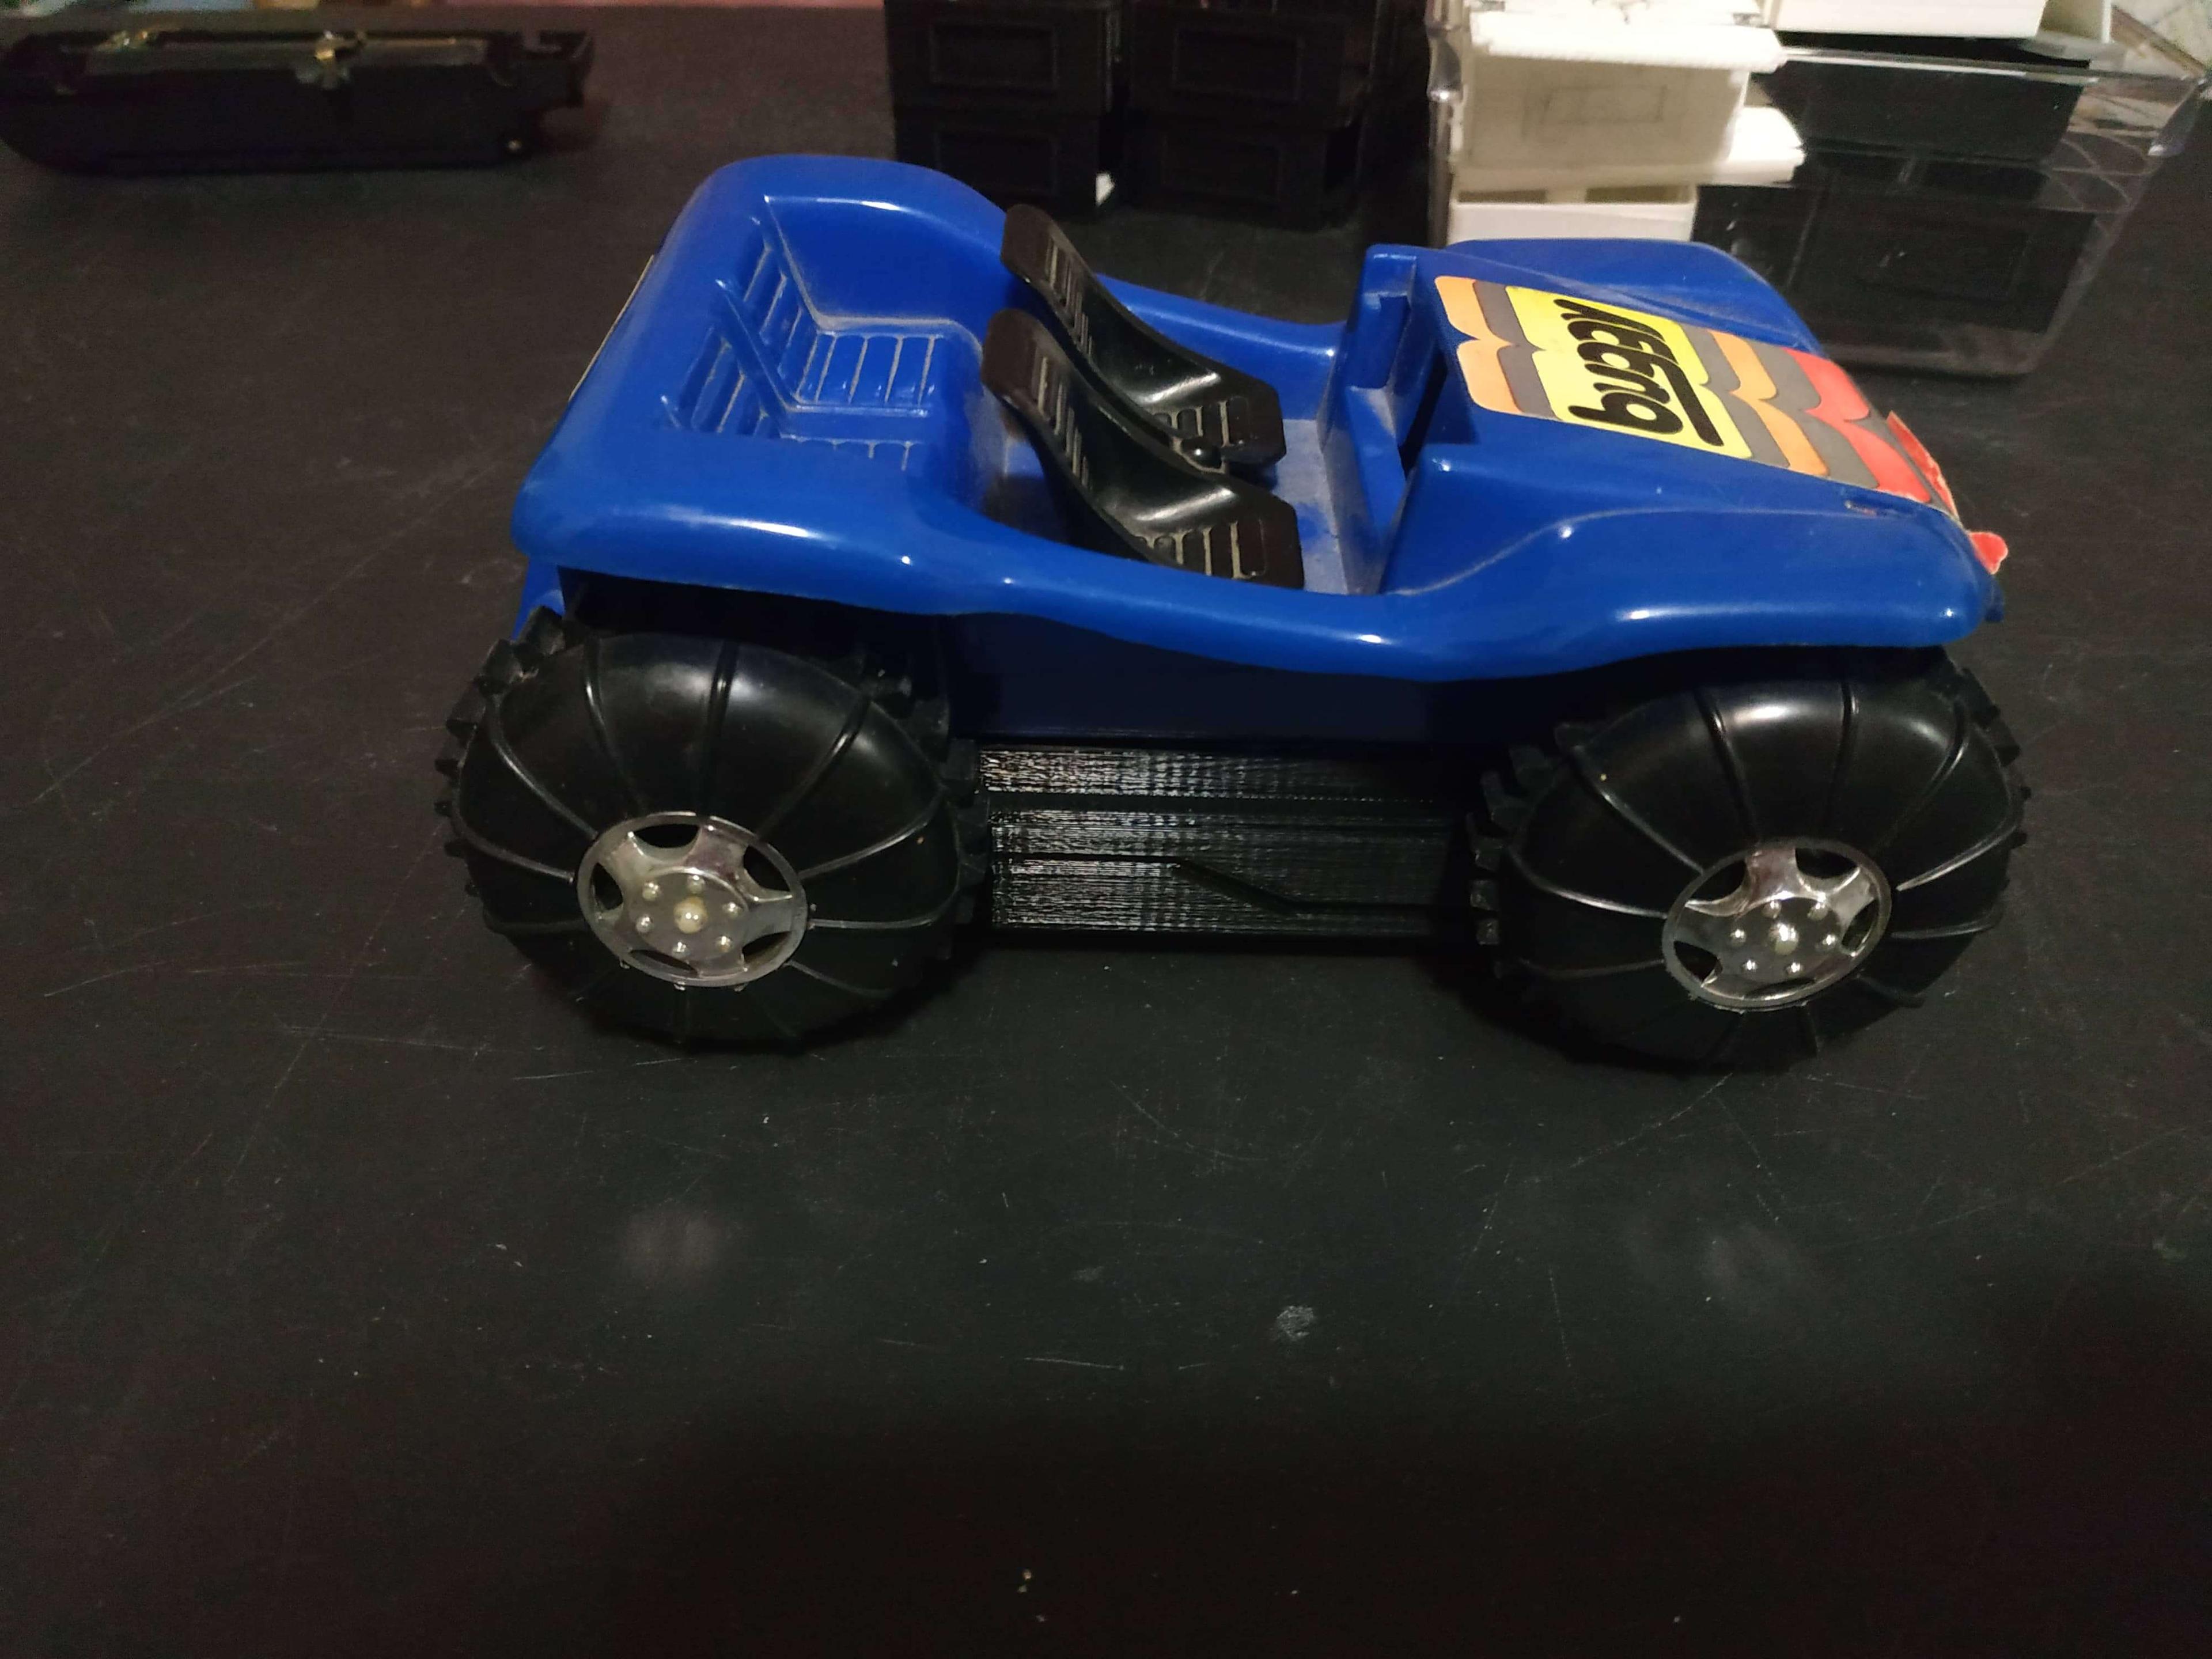 The buggy sits on its wheels on a table, the side opposite the switch is showing, with a 'lightning bolt' pattern on the 3D printed base